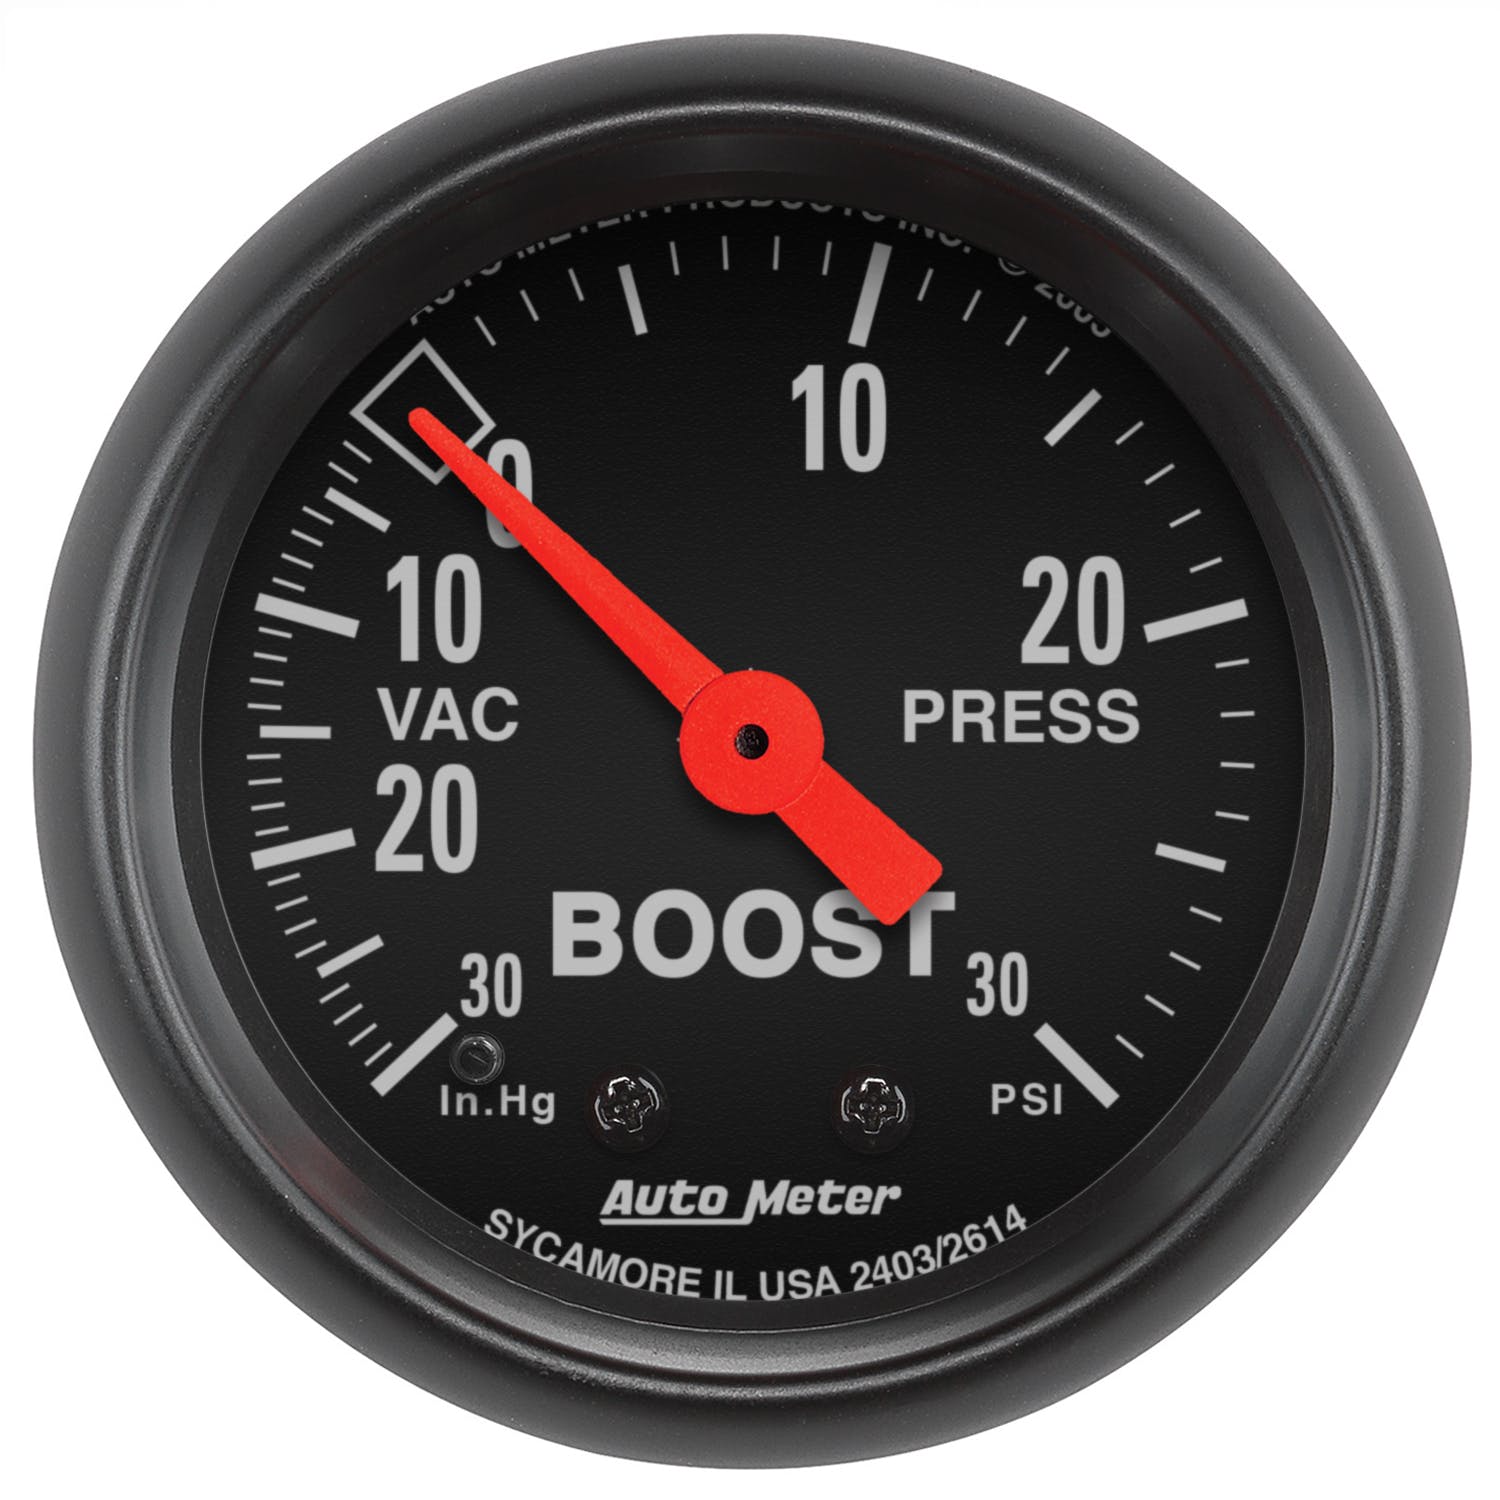 AutoMeter Products 2614 Boost/Vac 30 In. Hg/30 PSI